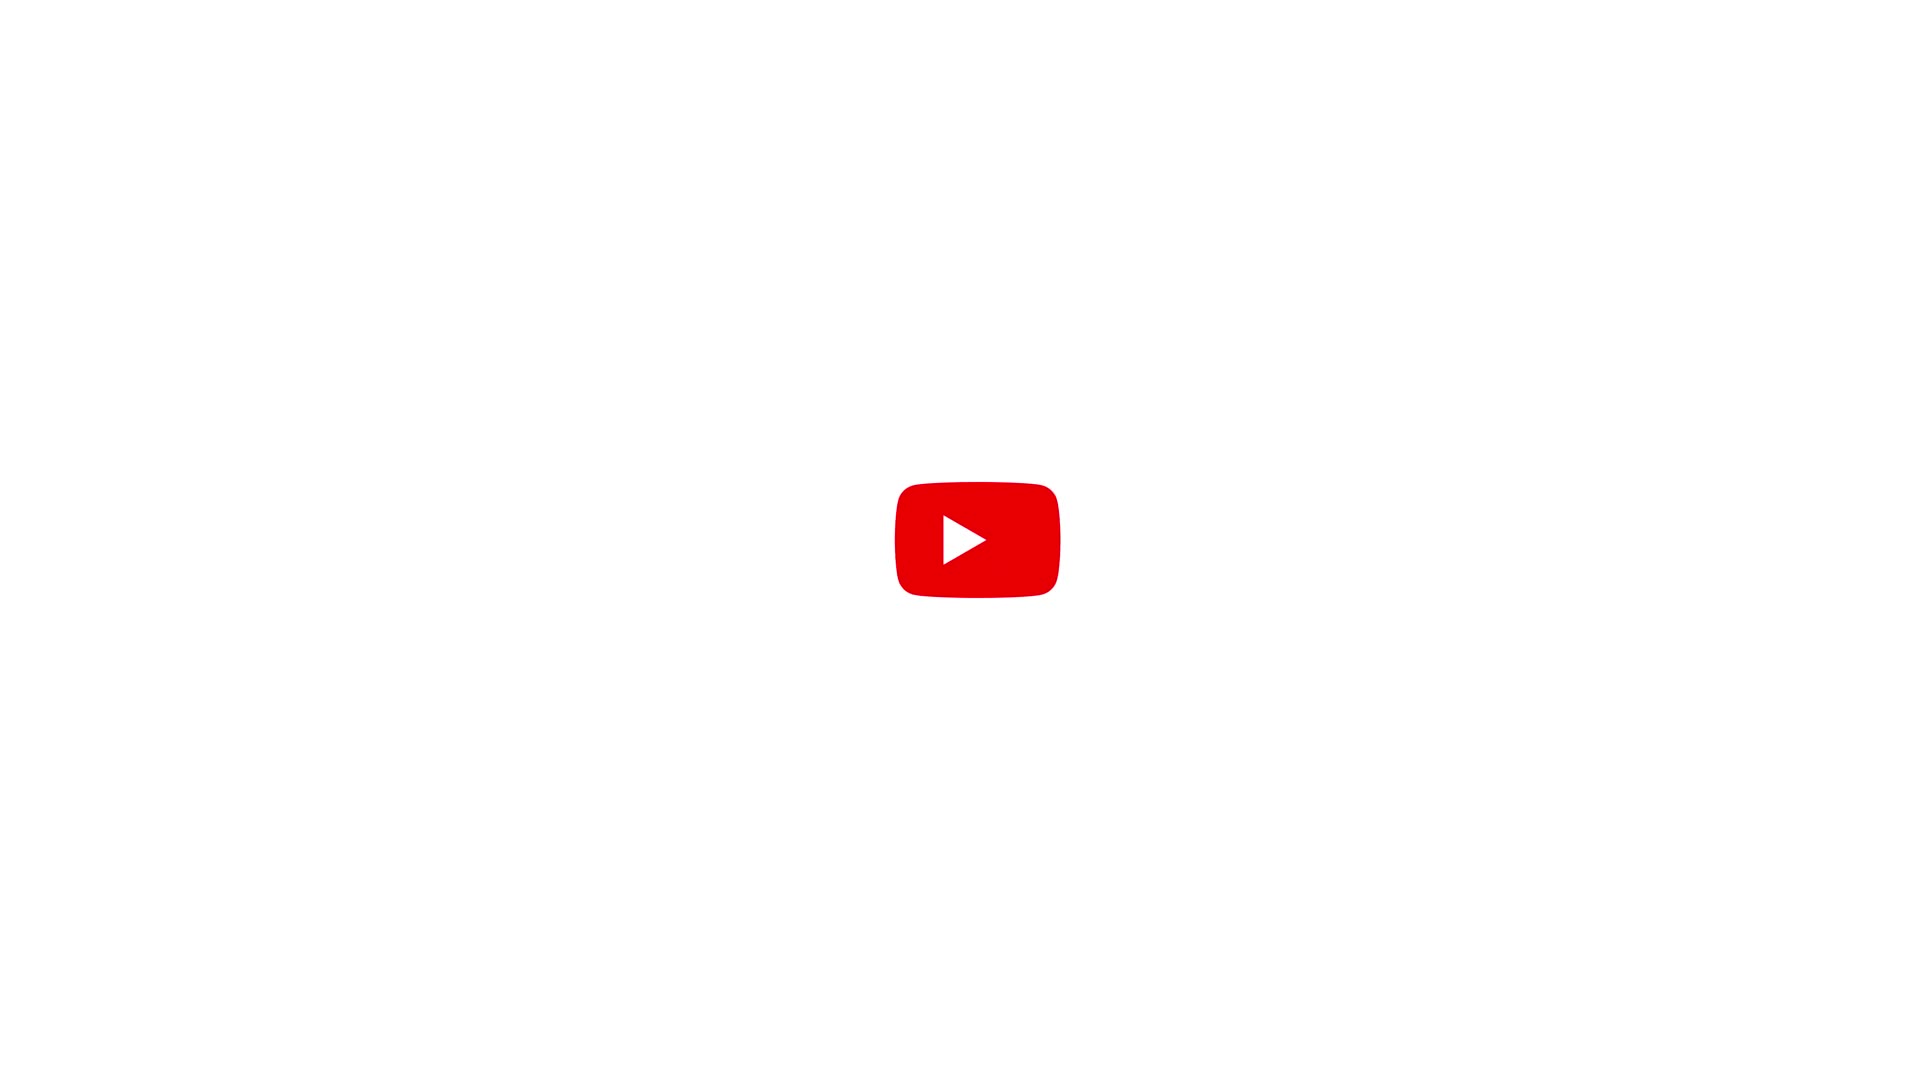 Youtube paly video player business logo template Vector Image